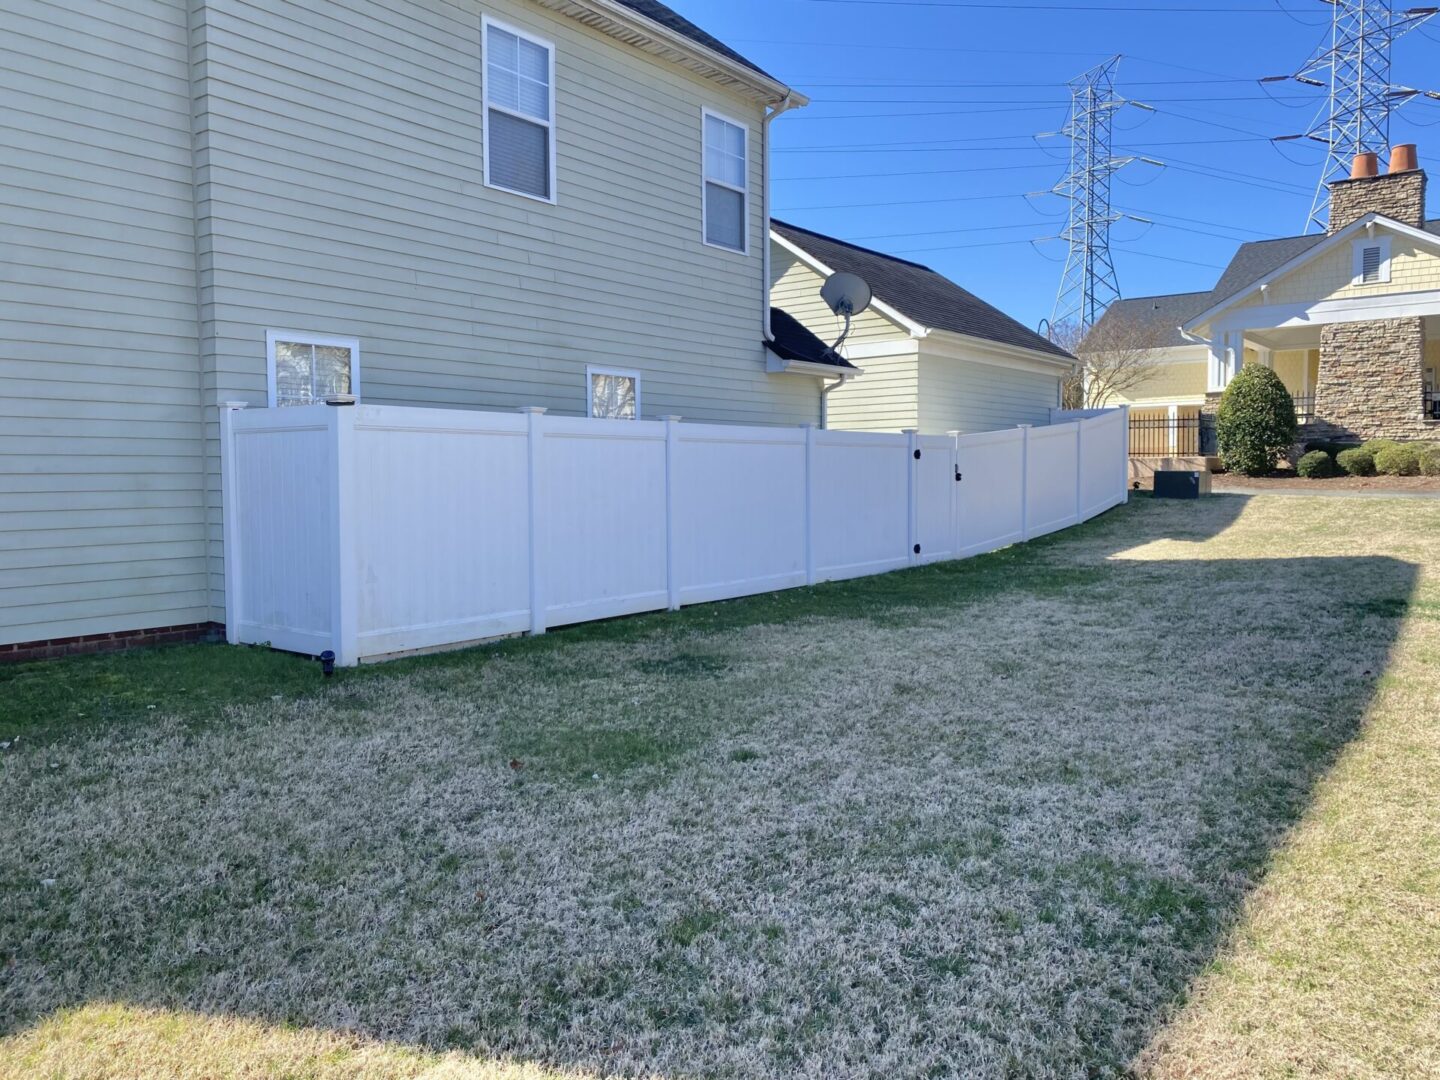 houses with white fence and grass